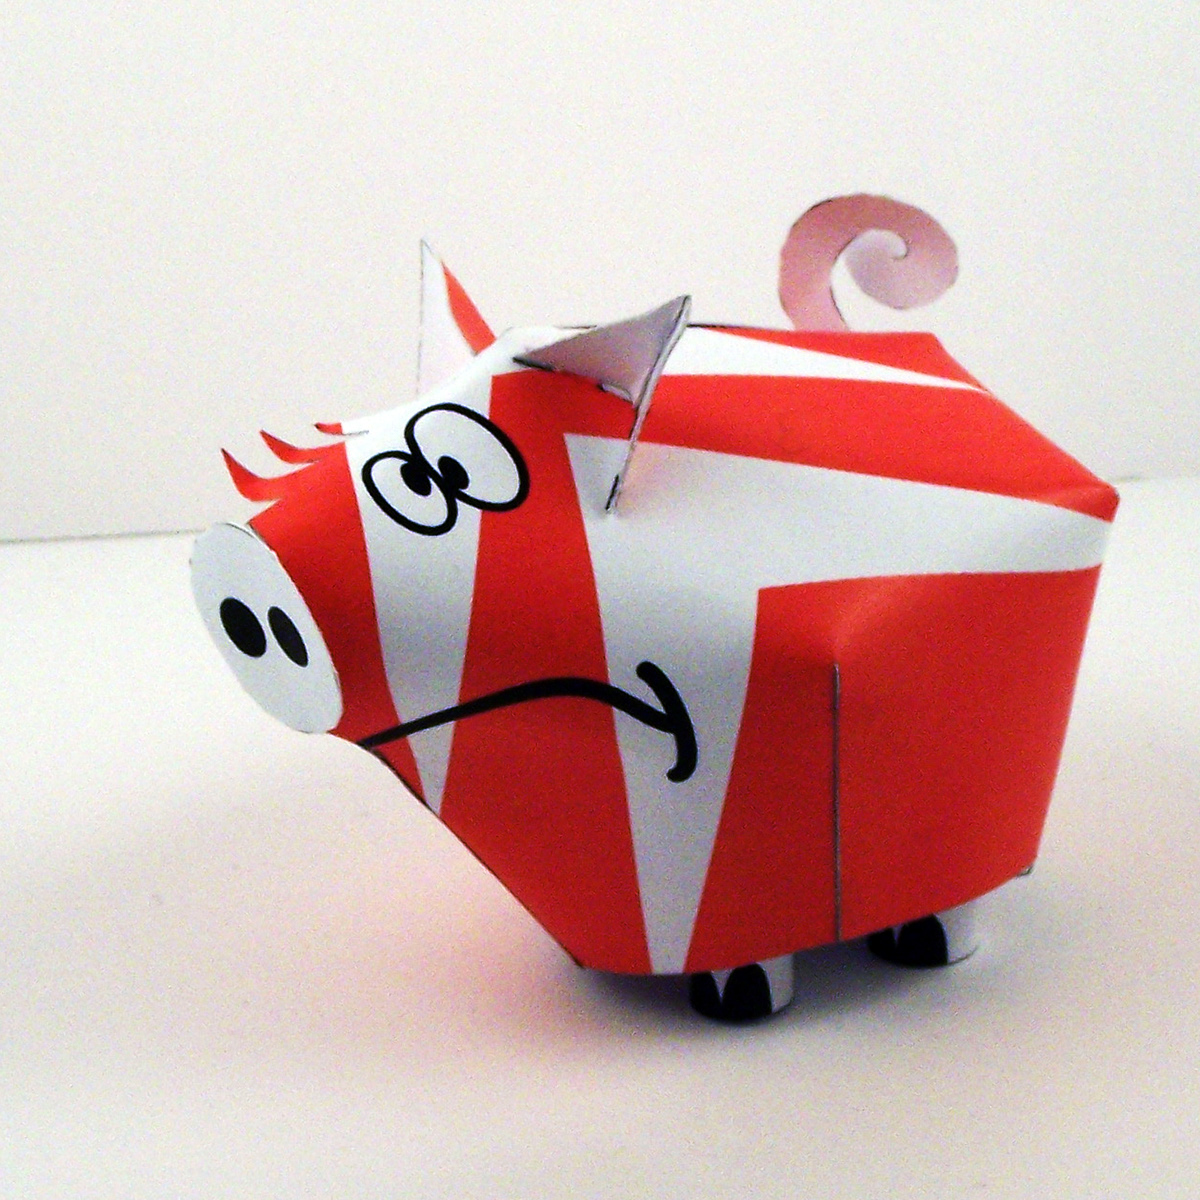 paper toys Paper toy design paper toy creation